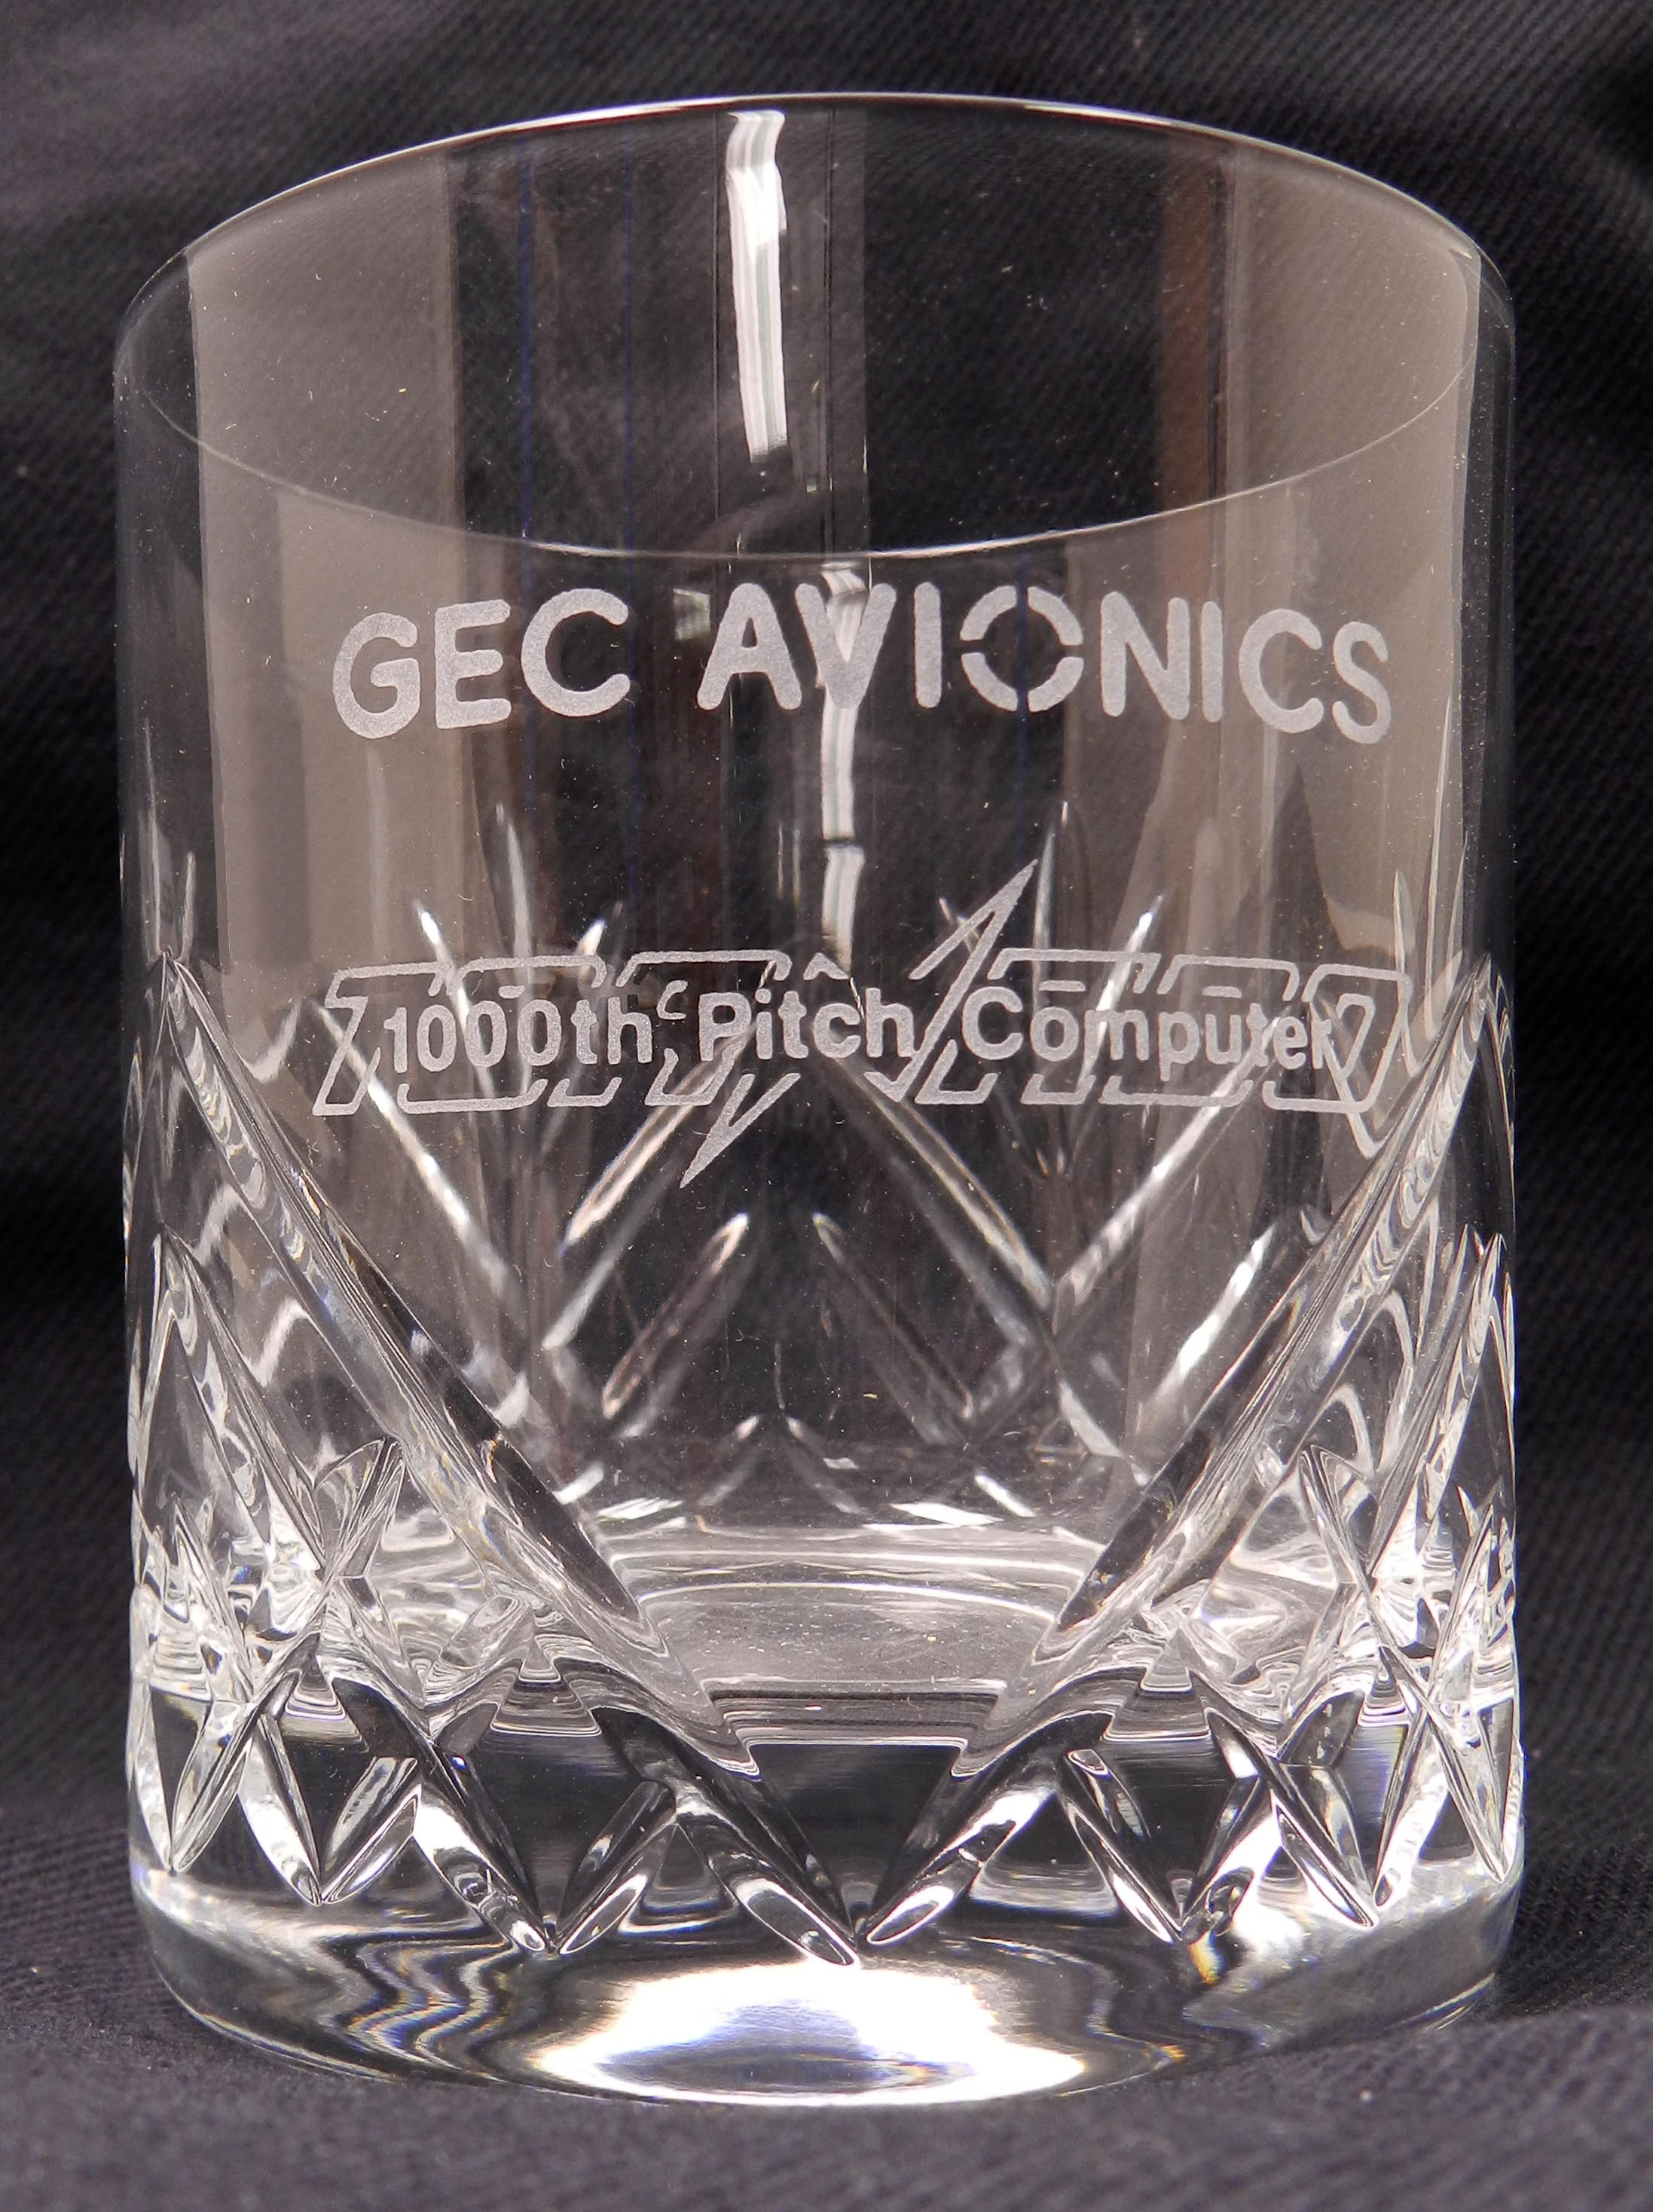 Crystal Glass for 1,000th CSAS Pitch Computer